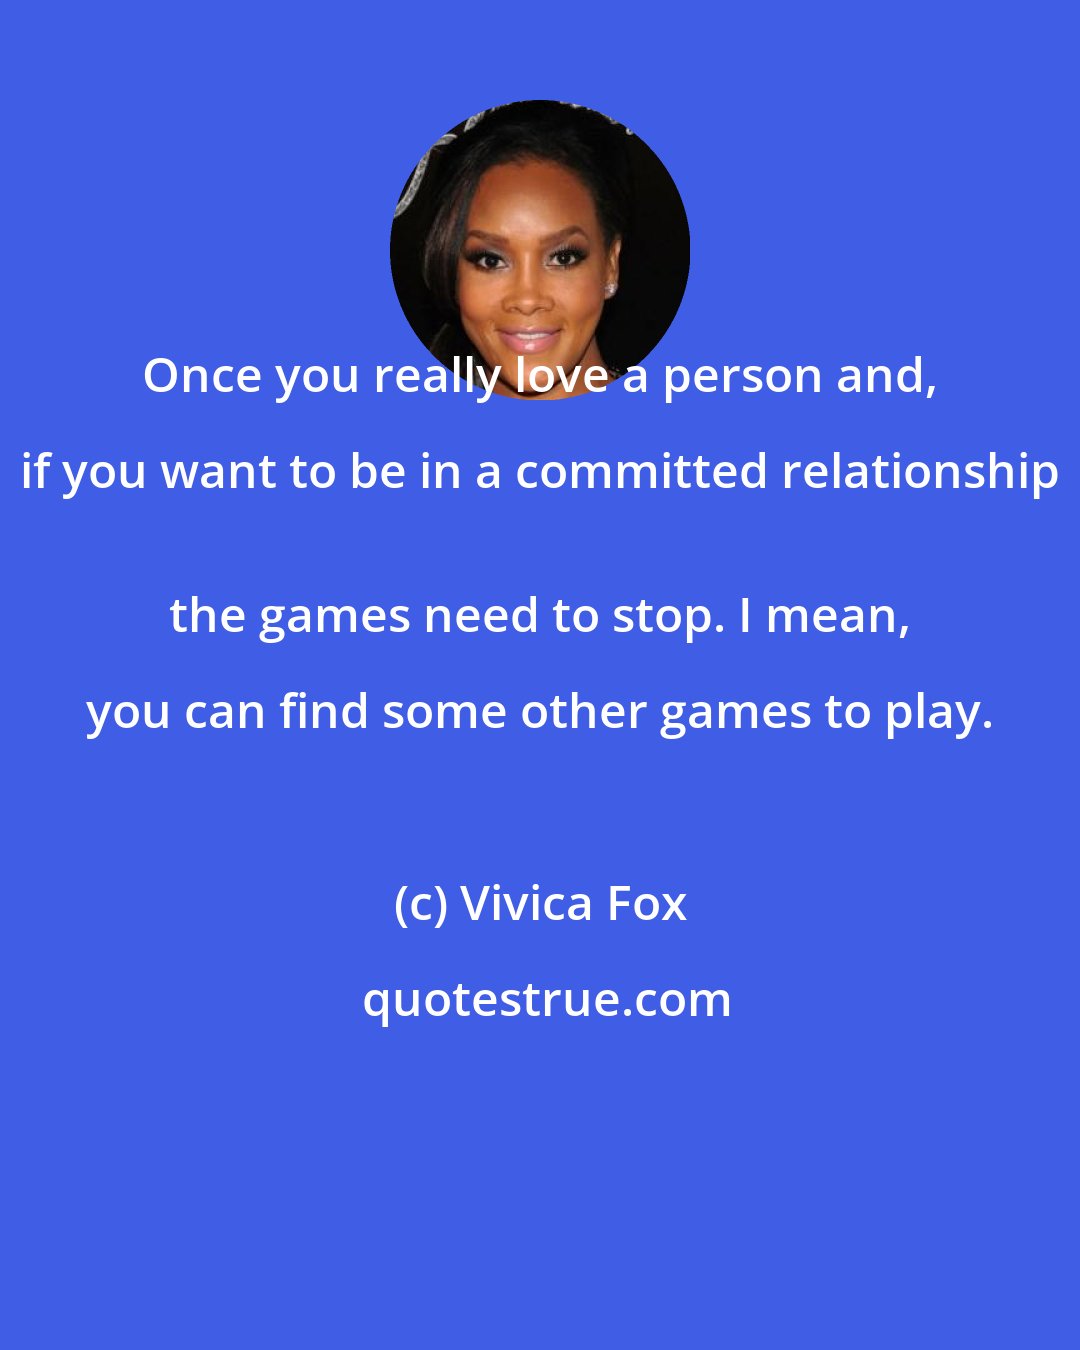 Vivica Fox: Once you really love a person and, if you want to be in a committed relationship 
 the games need to stop. I mean, you can find some other games to play.